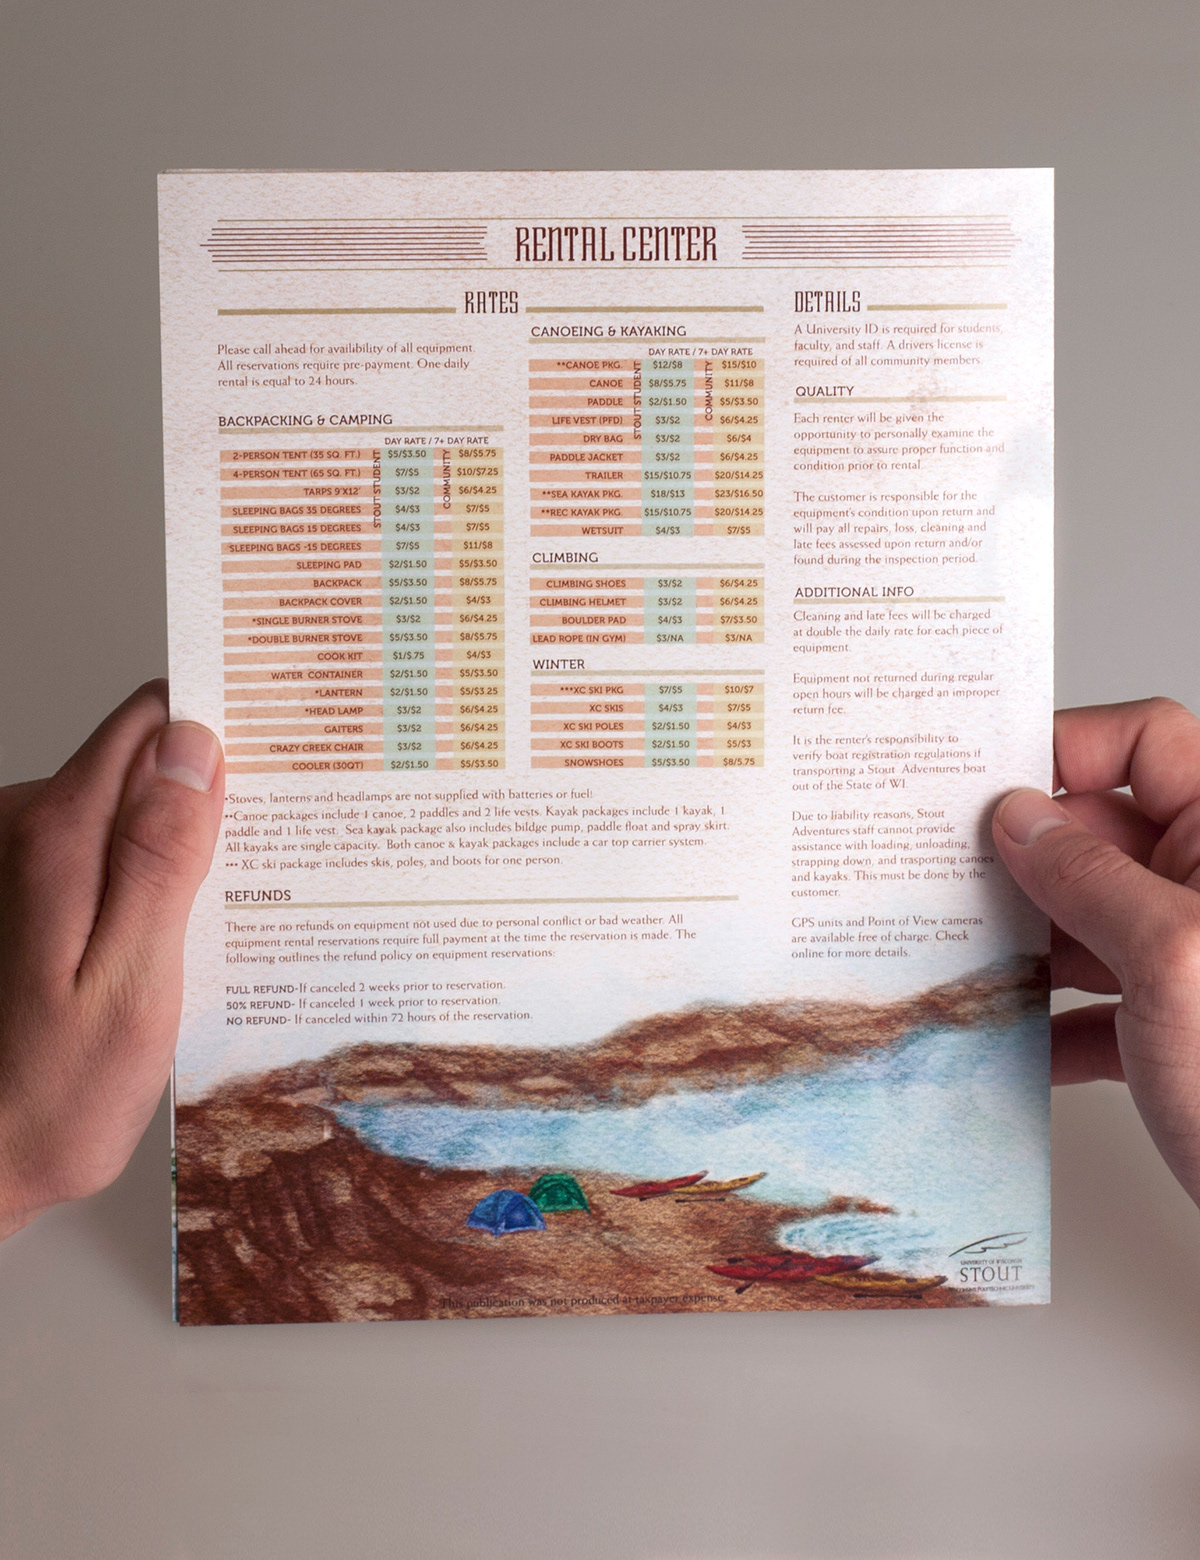 adventure Charts Layout information design Bi-fold photoshop painting outdoors Hand Lettered